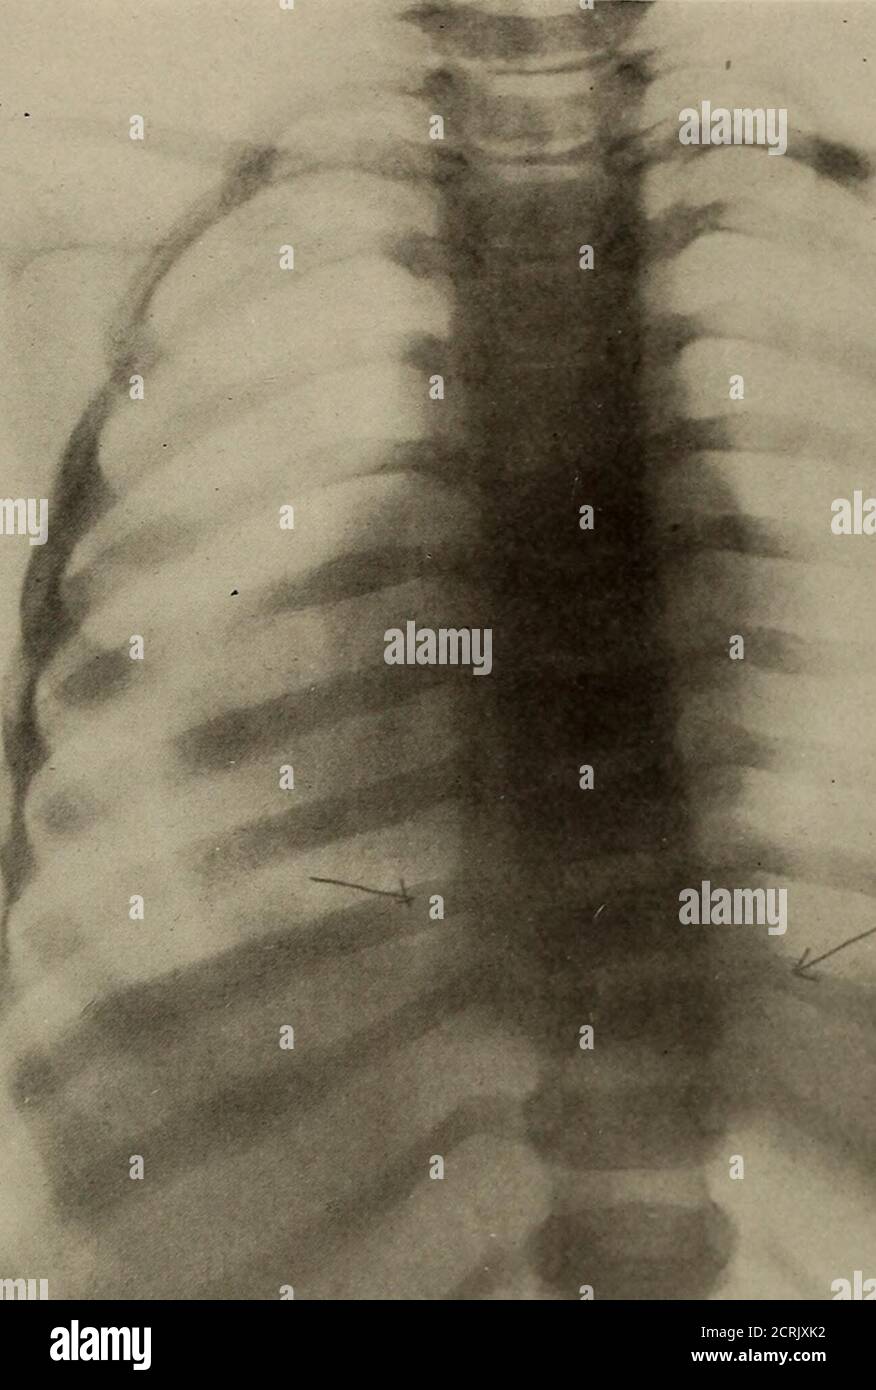 . Living anatomy and pathology; . v PLATE 104. TUBERCULAR ABSCESS OF THE SPINE. The arrows point towards the vertebras affected; namely,the ninth and tenth dorsal. PI.ATE 104. Stock Photo